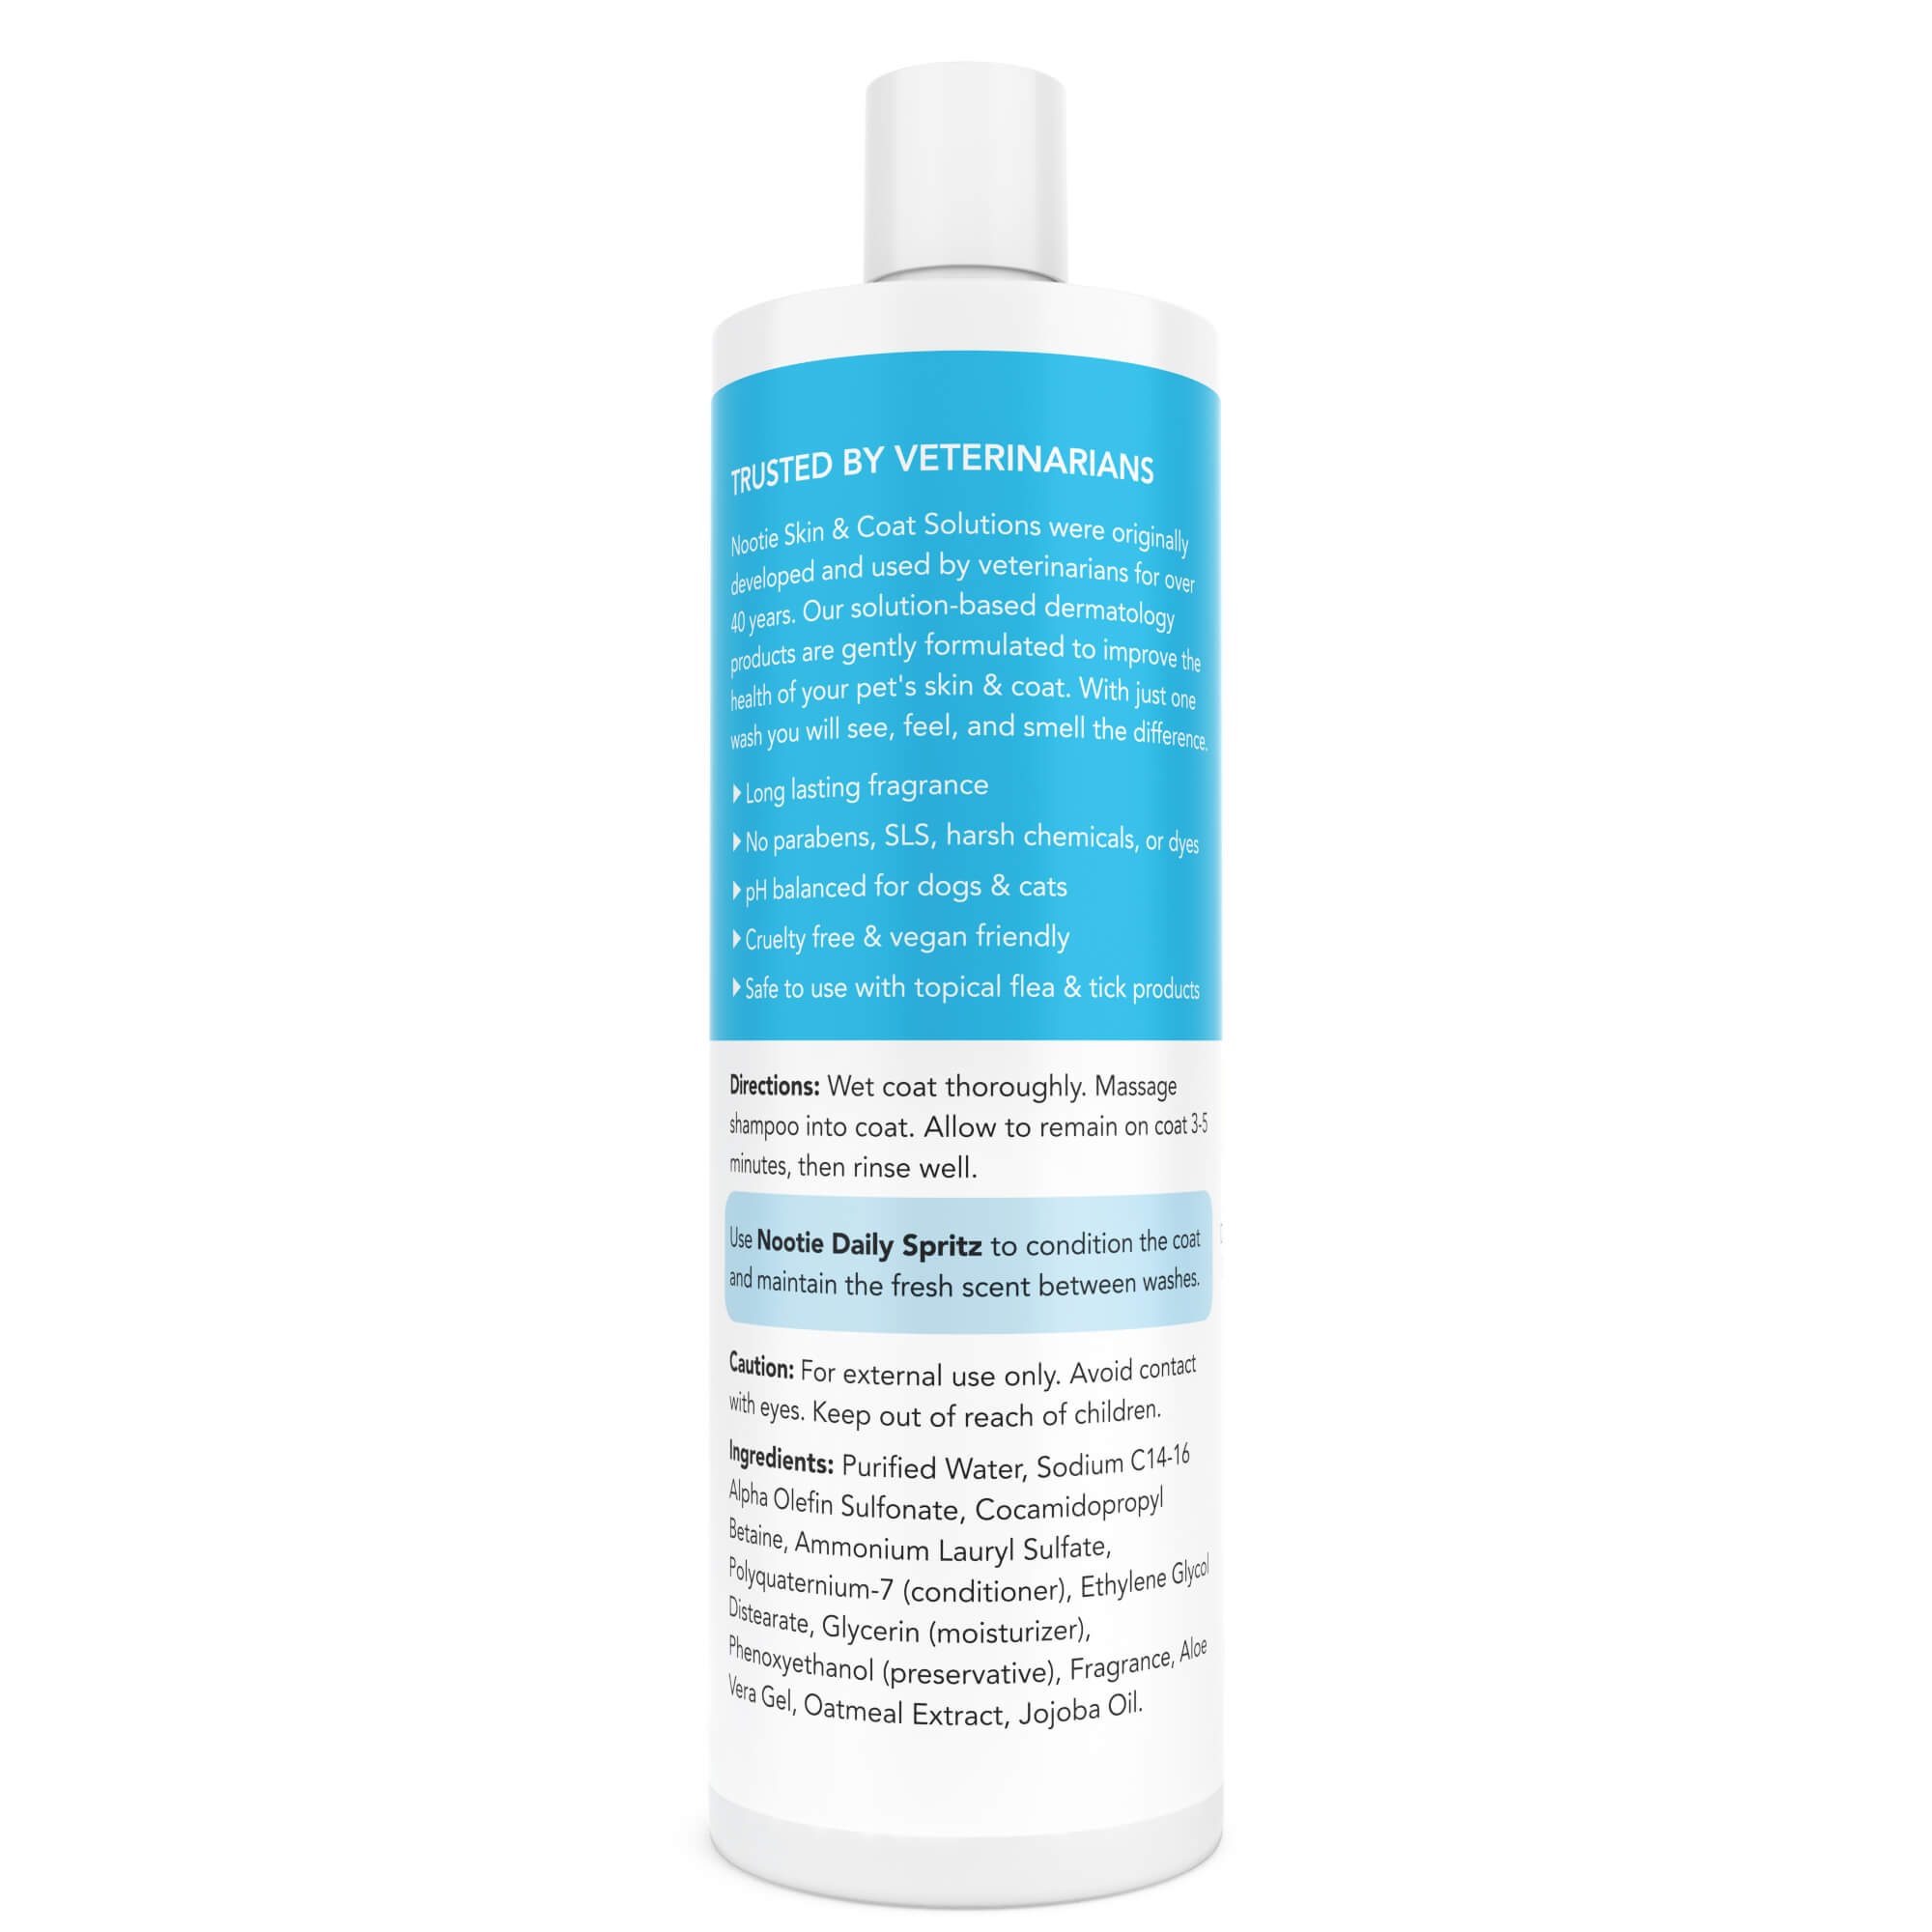 <img src="pet shampoo.png" alt="nootie pet shampoo in sweet pea and vanilla scent back of bottle">